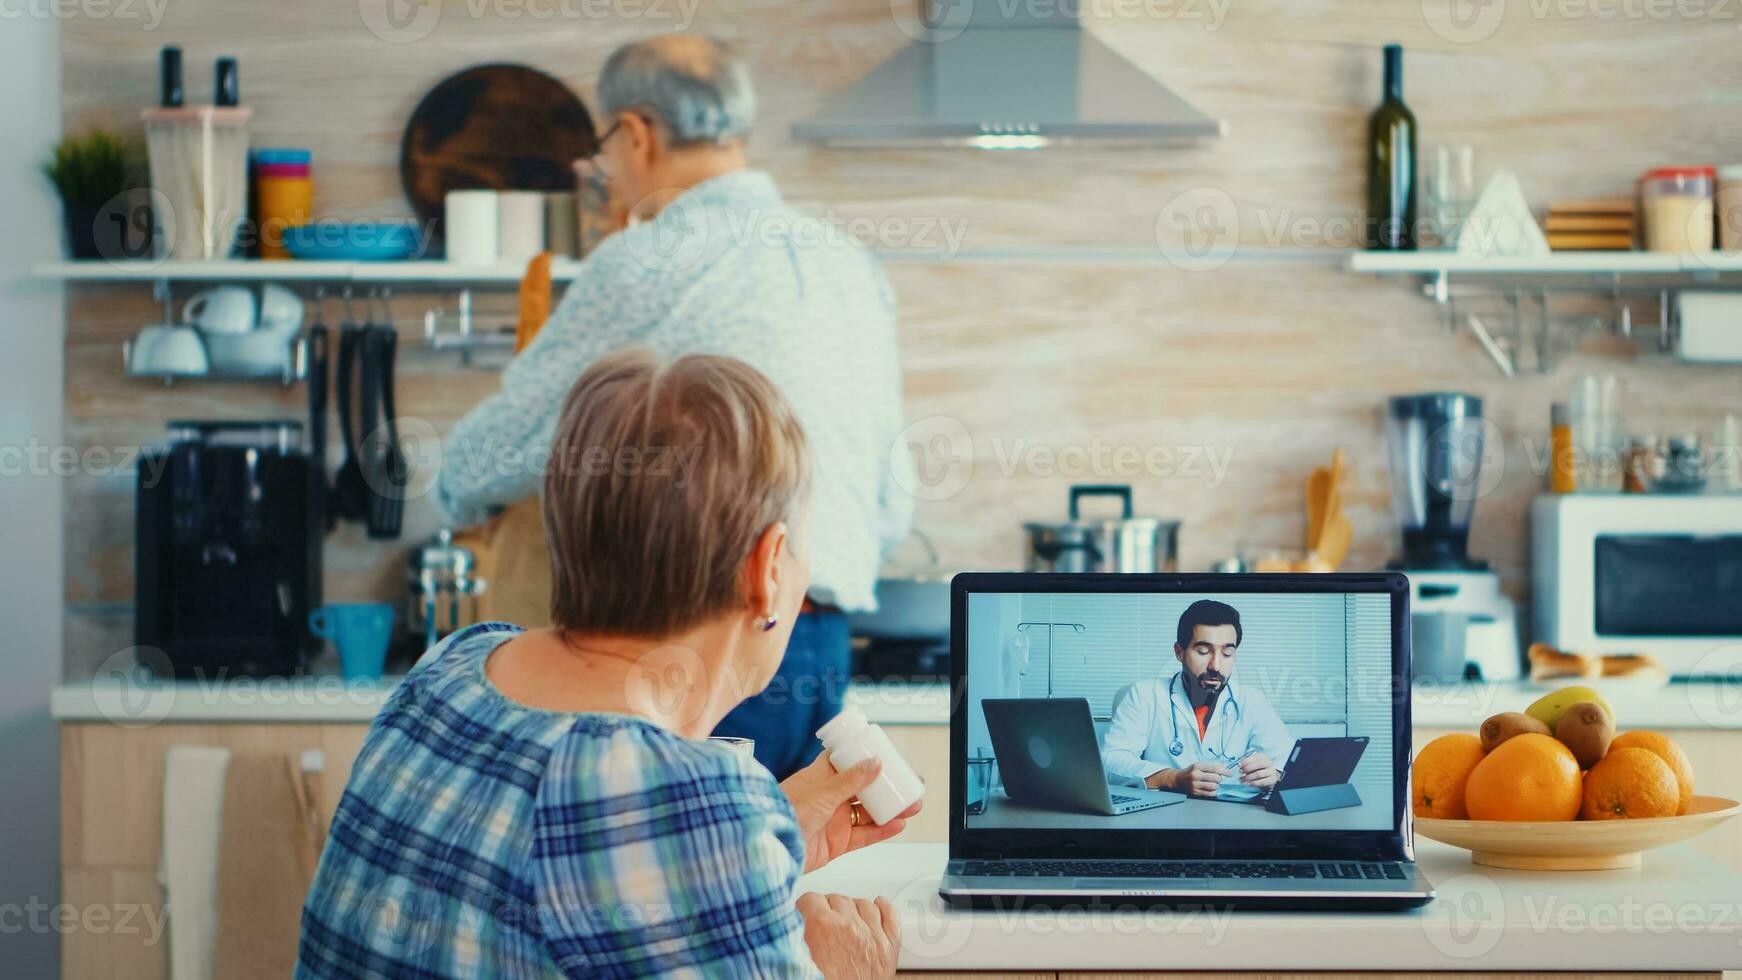 Senior woman holding bottle of pills during video conference with doctor using laptop in kitchen. Online health consultation for elderly people drugs ilness advice on symptoms, physician telemedicine webcam. Medical care internet chat photo